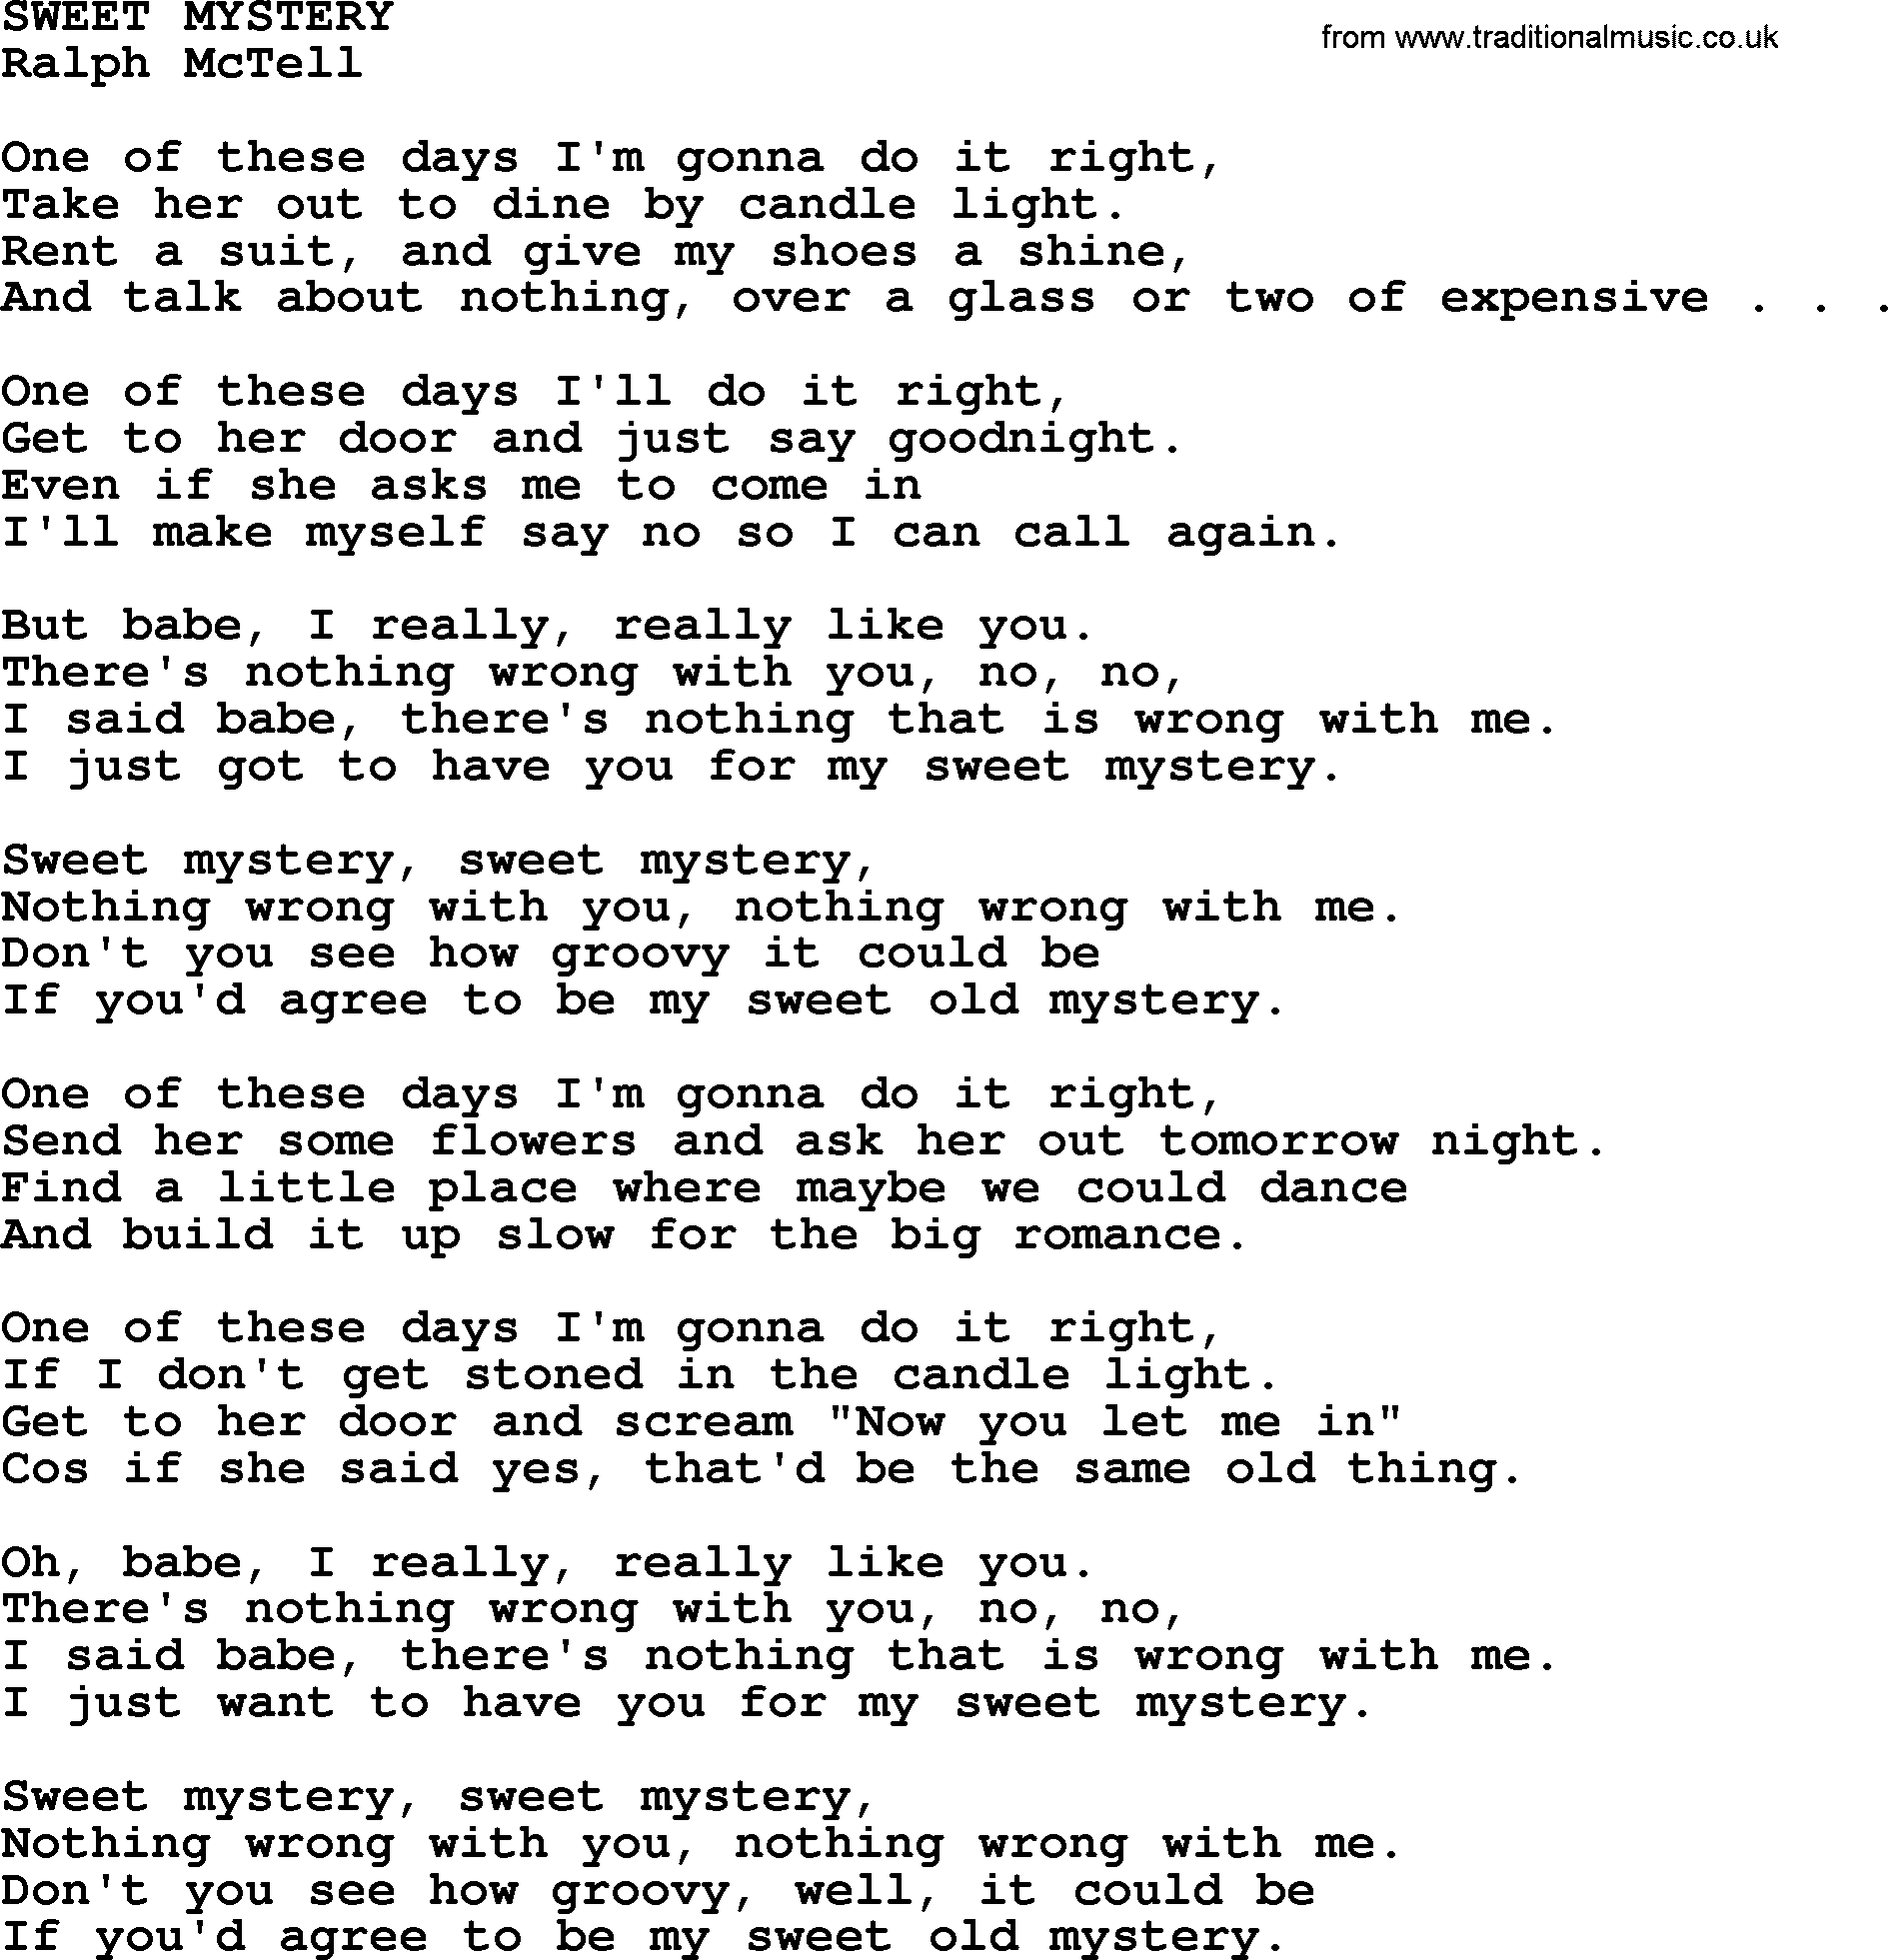 Sweet Mystery.txt - by Ralph McTell lyrics and chords